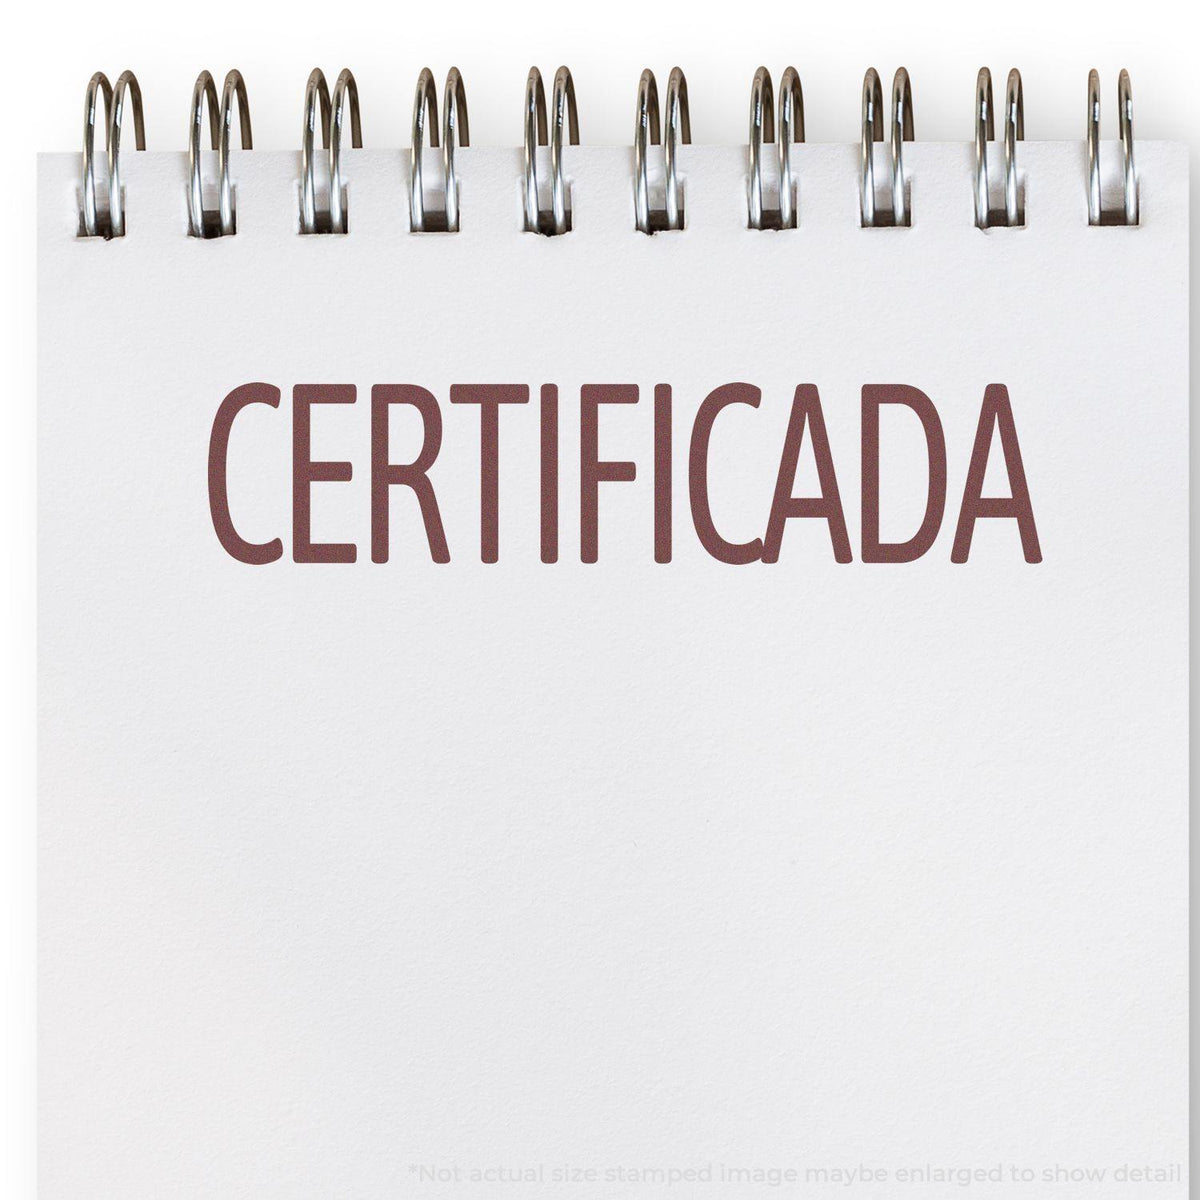 In Use Certificada Rubber Stamp Image